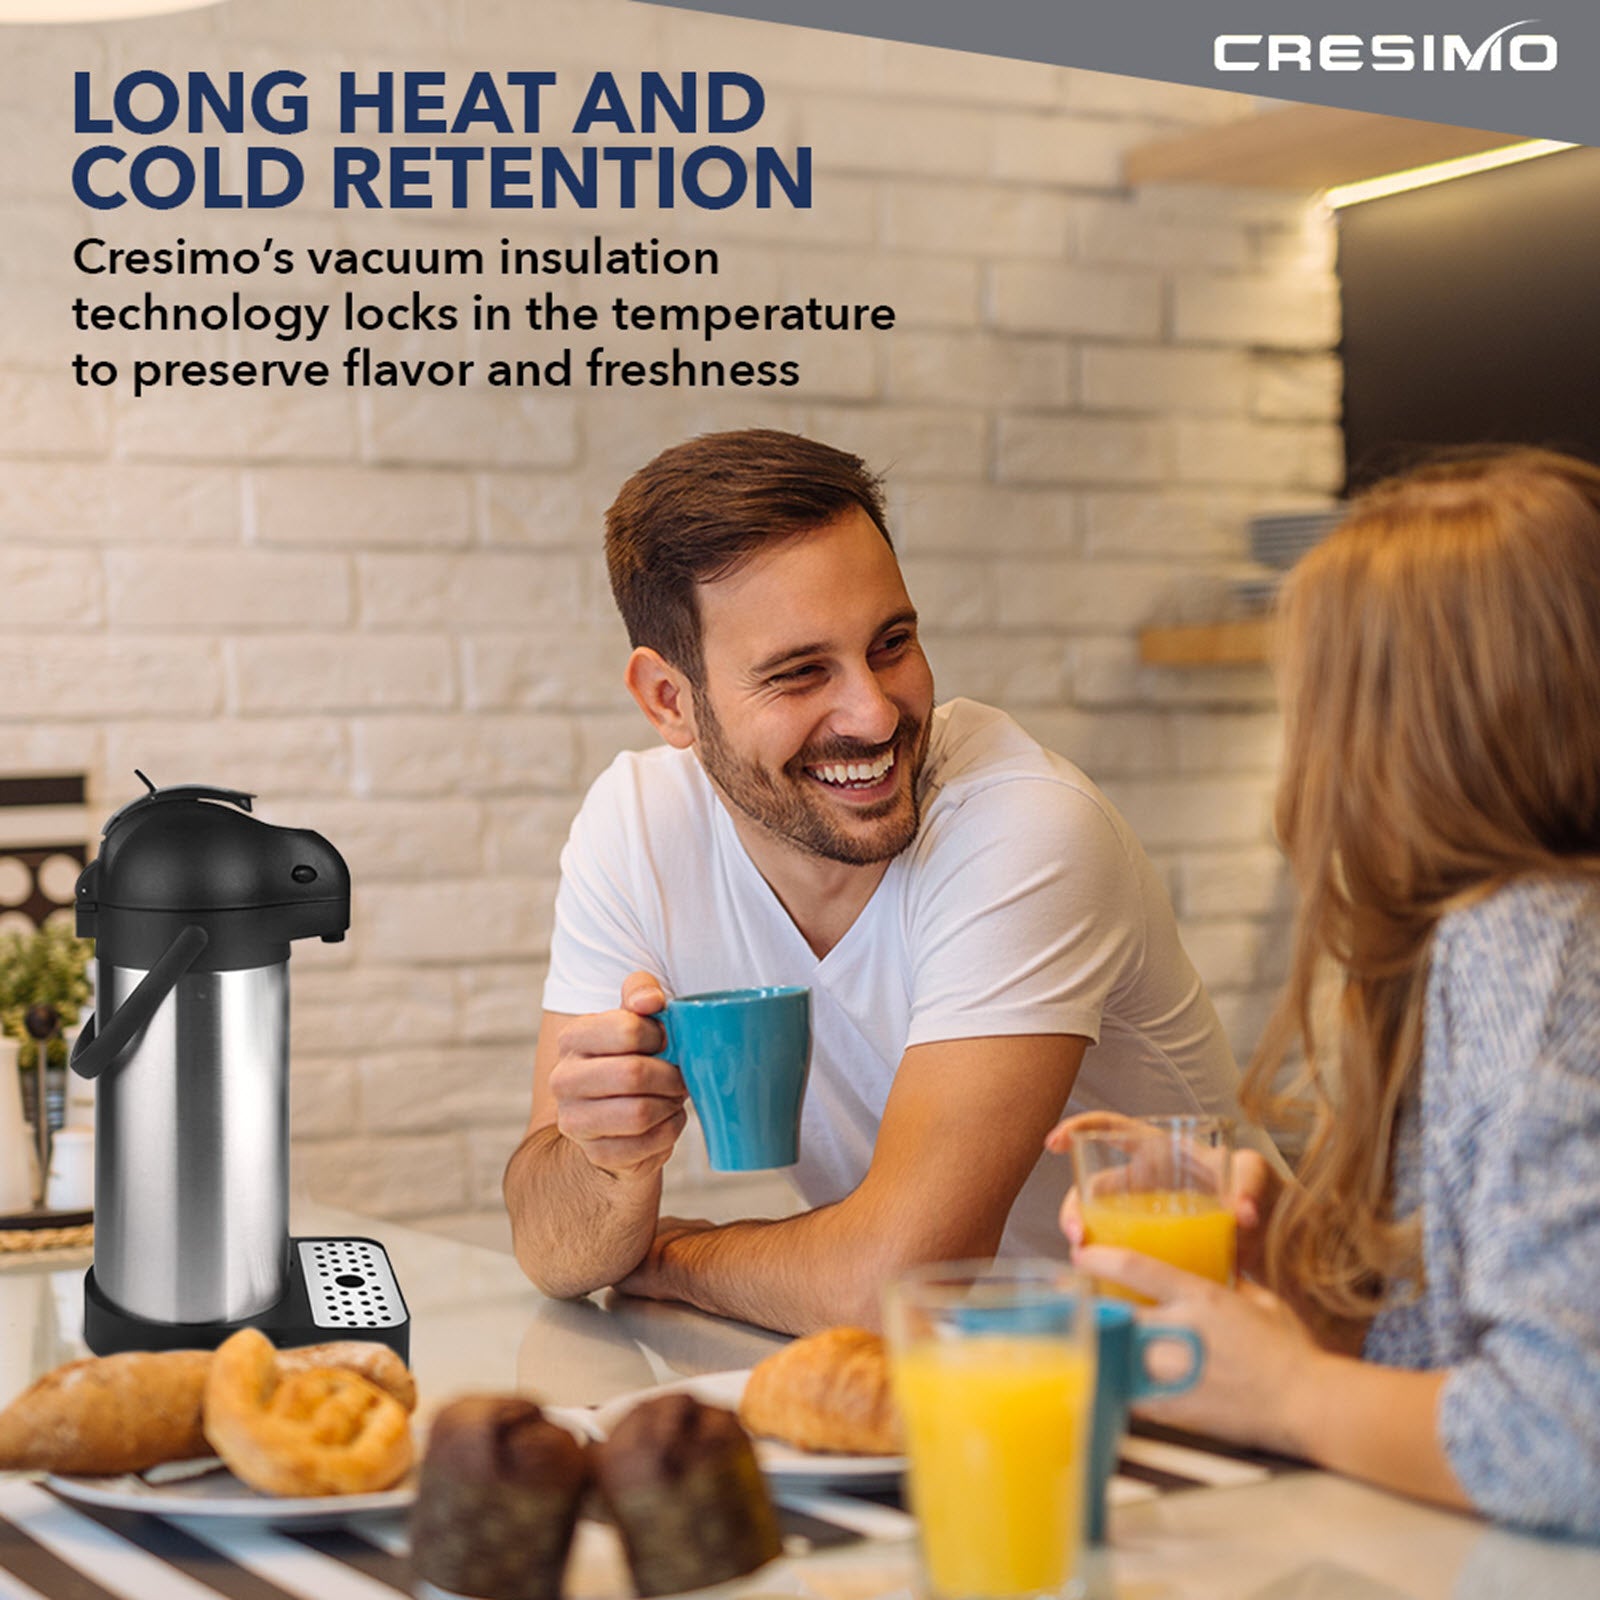 Cresimo 3 Liter Stainless Steel Thermal Airpot and Thermos